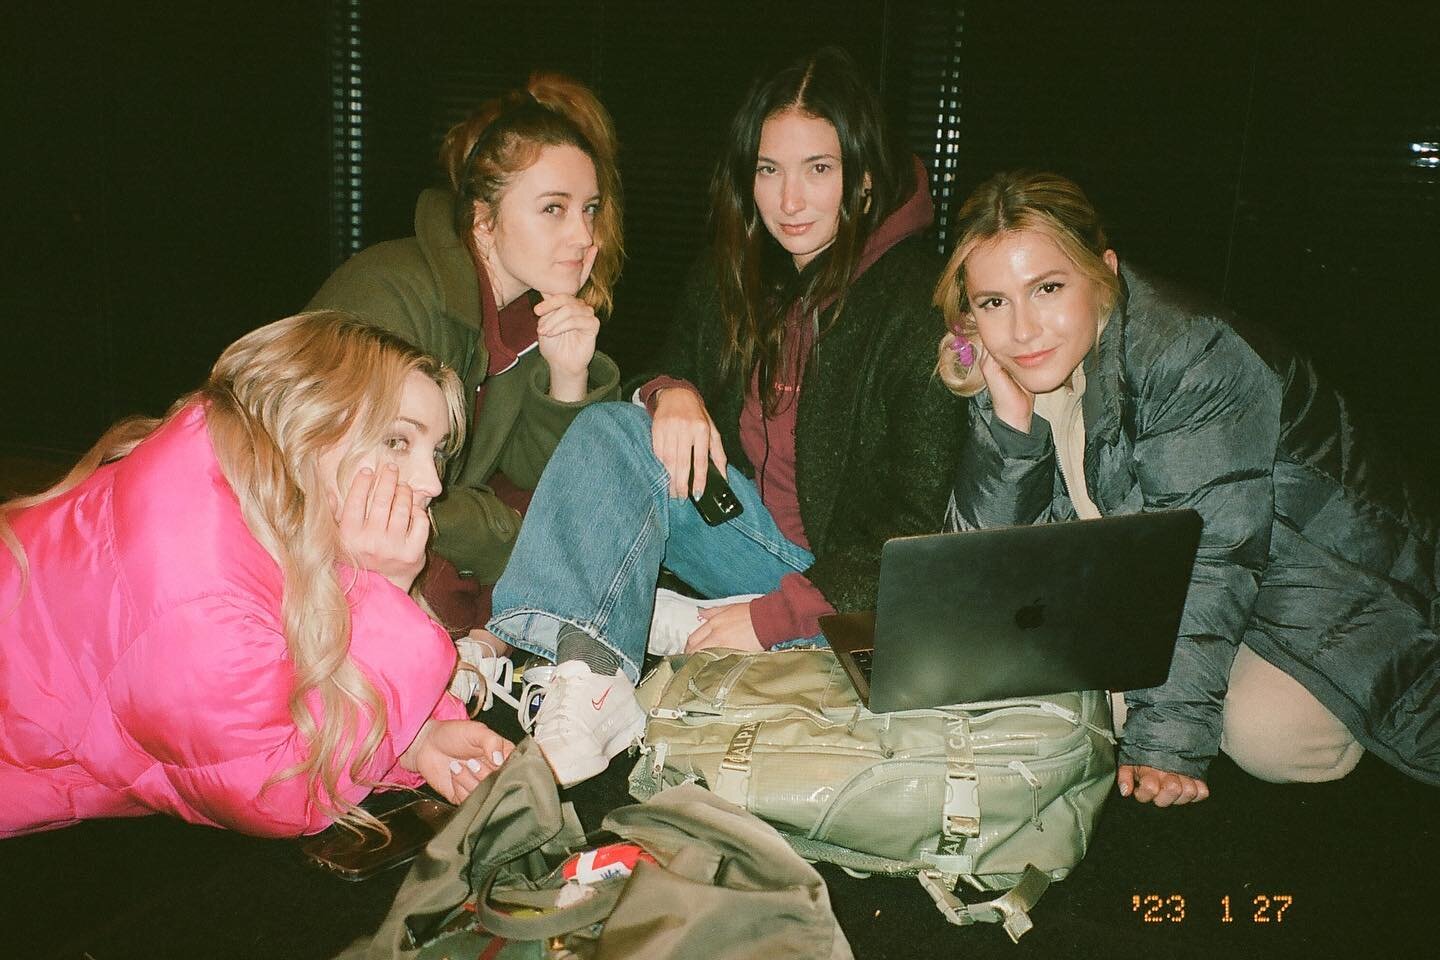 deeply grateful for @maddywhitby, @monicajoysherer, @nanhower, and @jamielynnspears. these women are our shining lights in the night sky.

Zoey 102 was written by Maddy and Monica, directed by Nancy, and executive produced by Jamie Lynn, plus Maddy, 